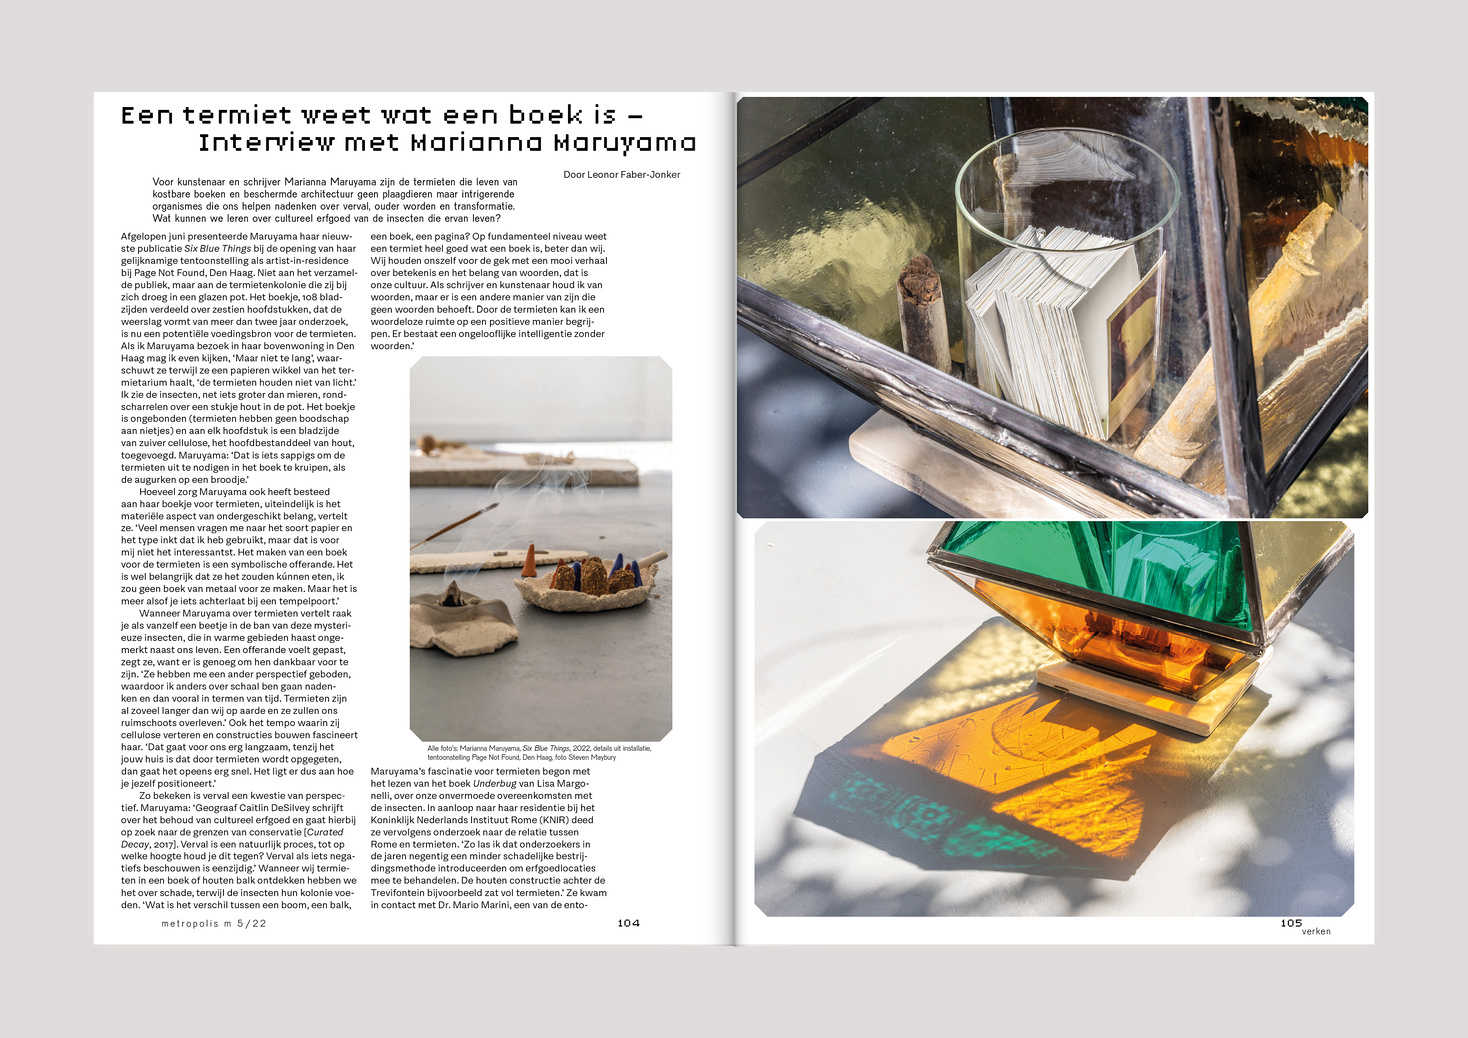 Interview with Marianna Maruyama in MetropolisM nr 5, 2022